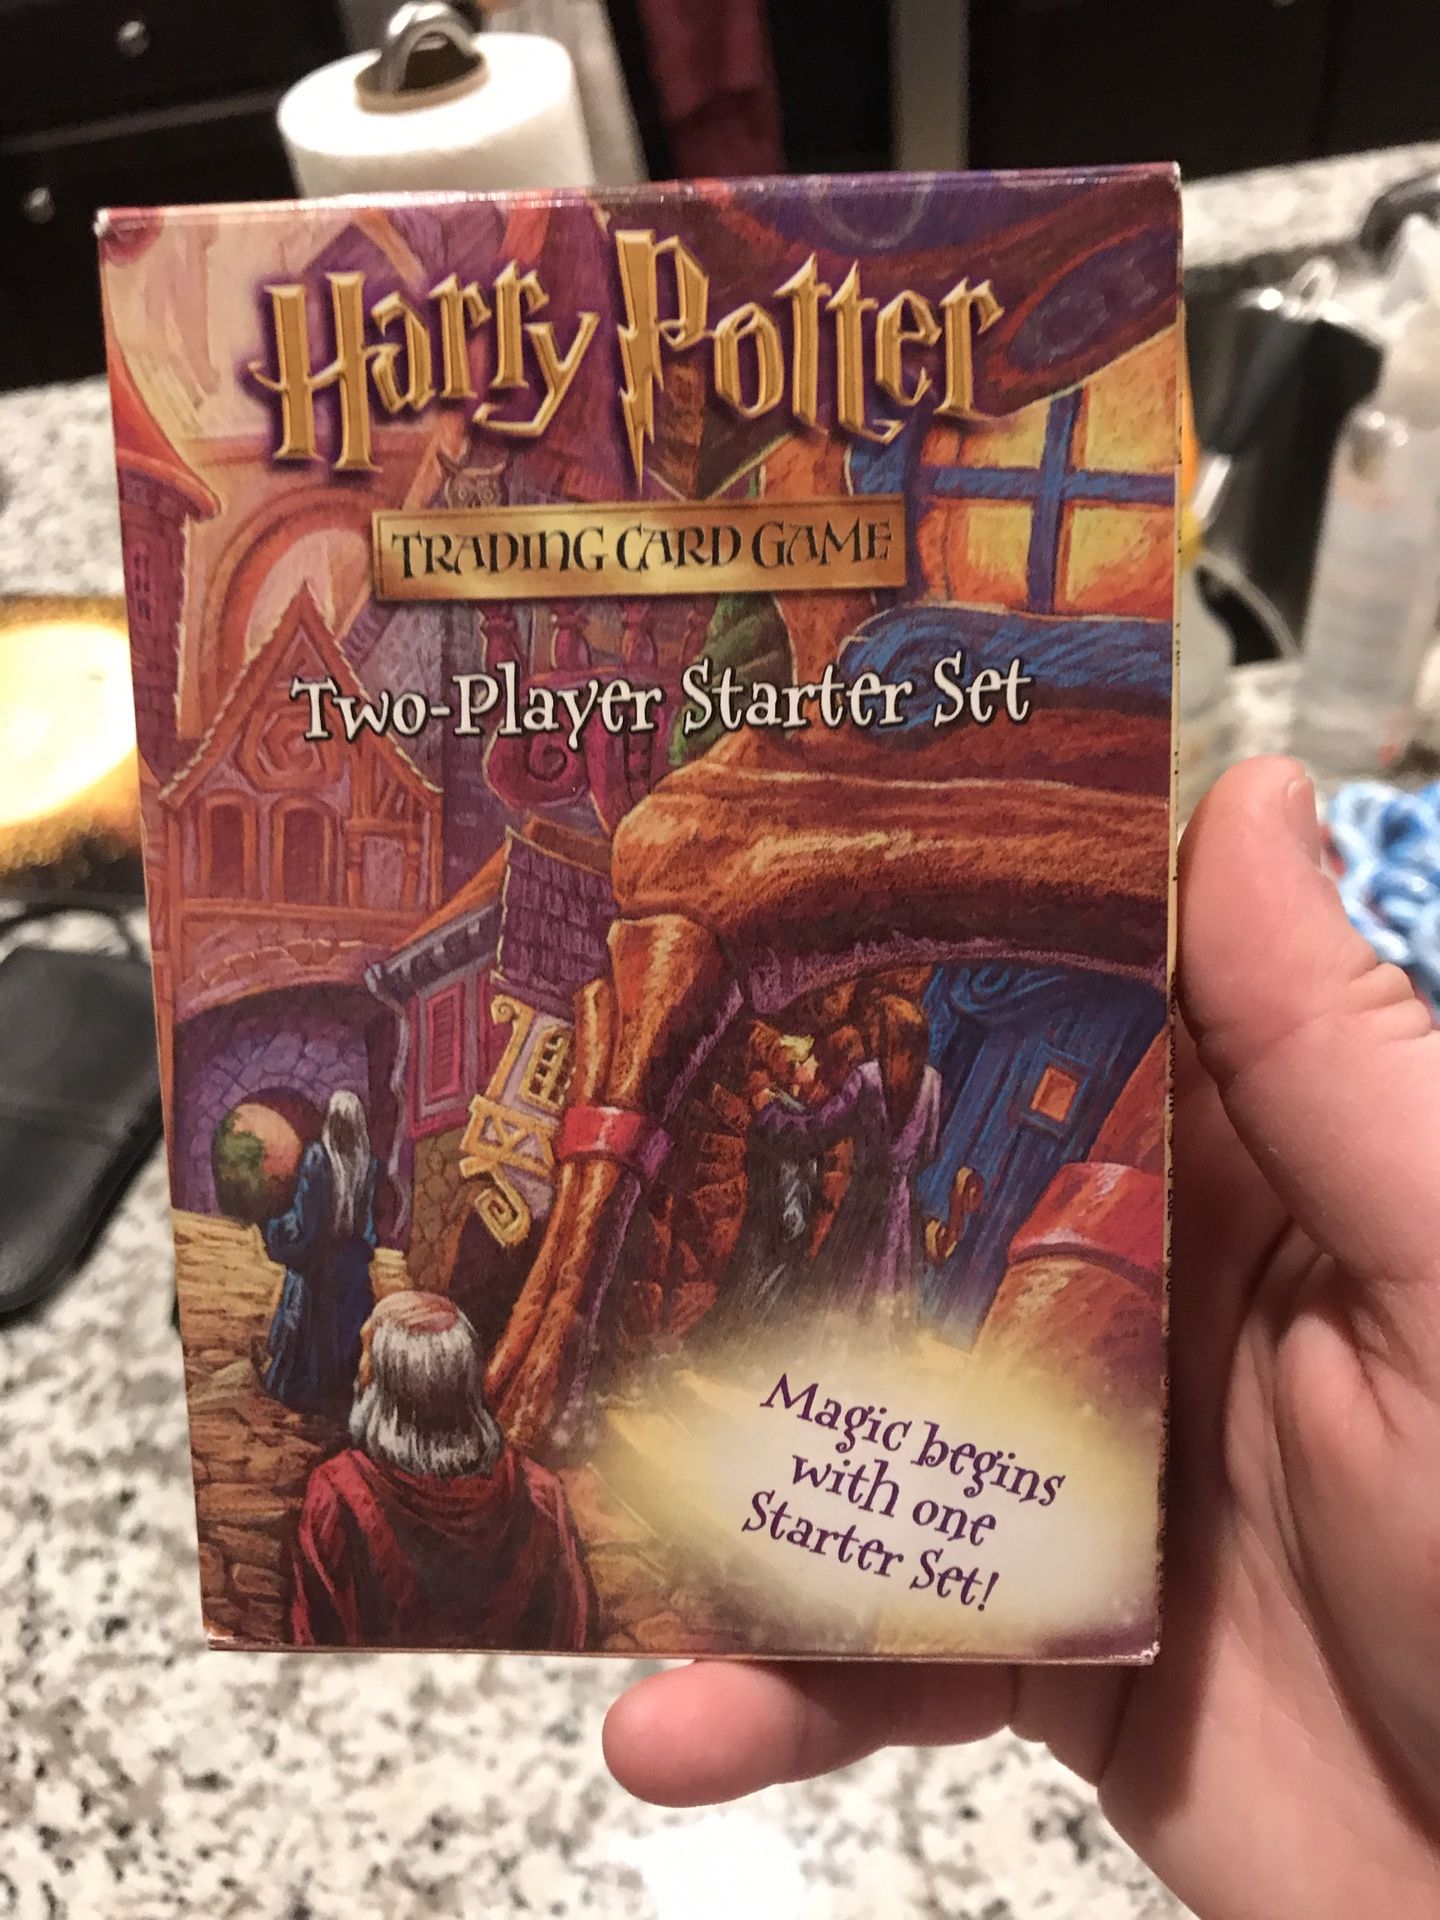 Harry potter original first edition trading card game